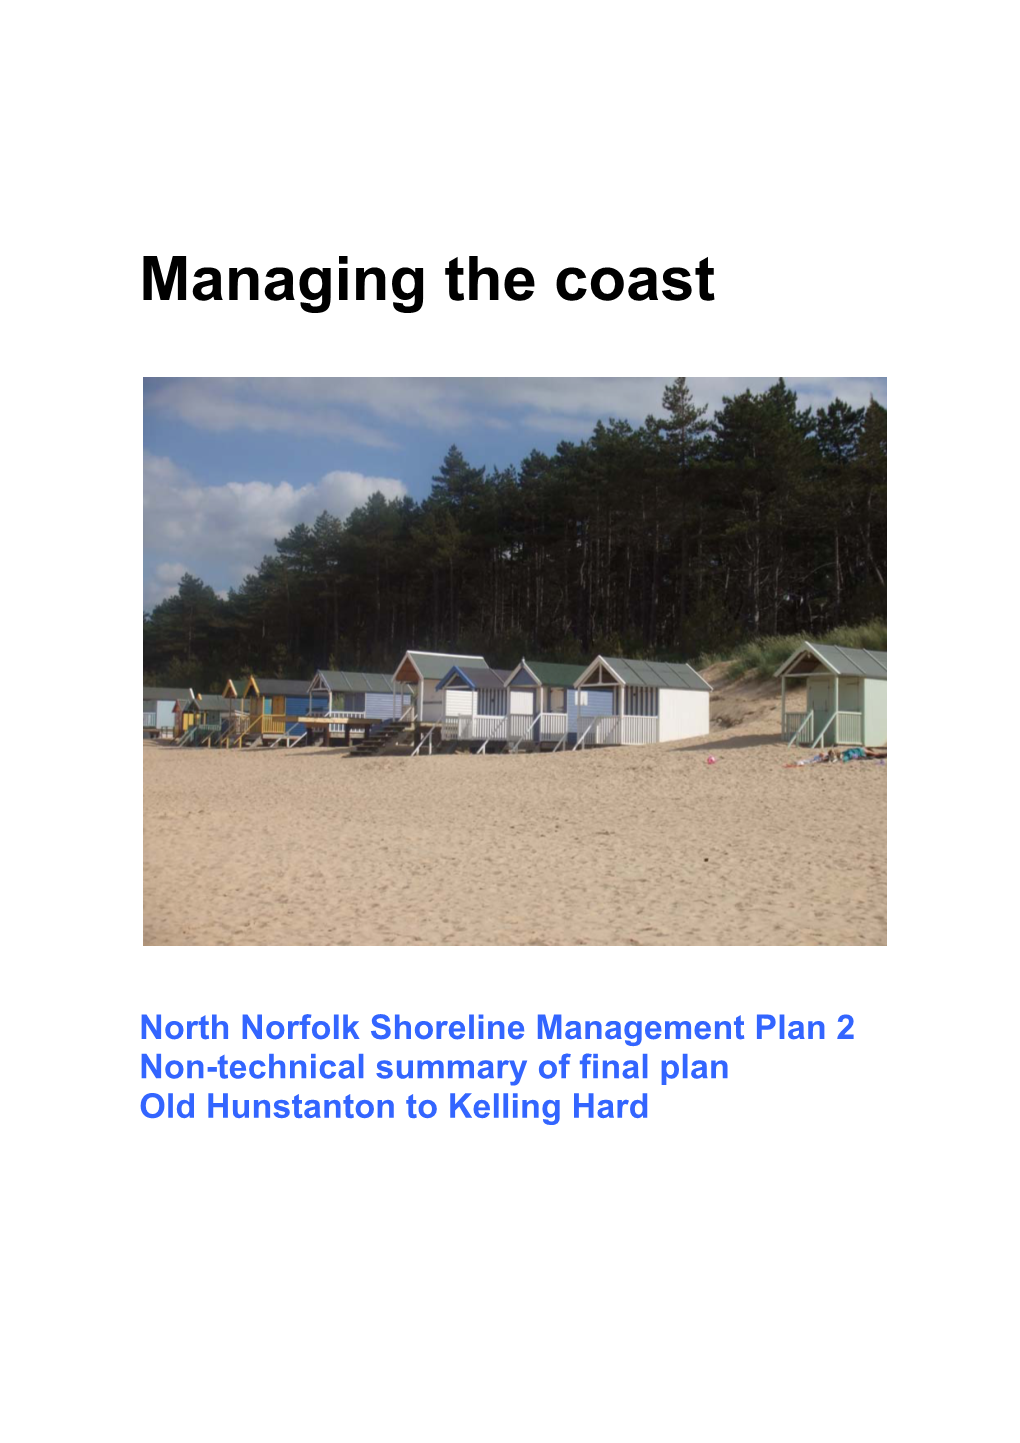 Non-Technical Summary of Final Plan Old Hunstanton to Kelling Hard